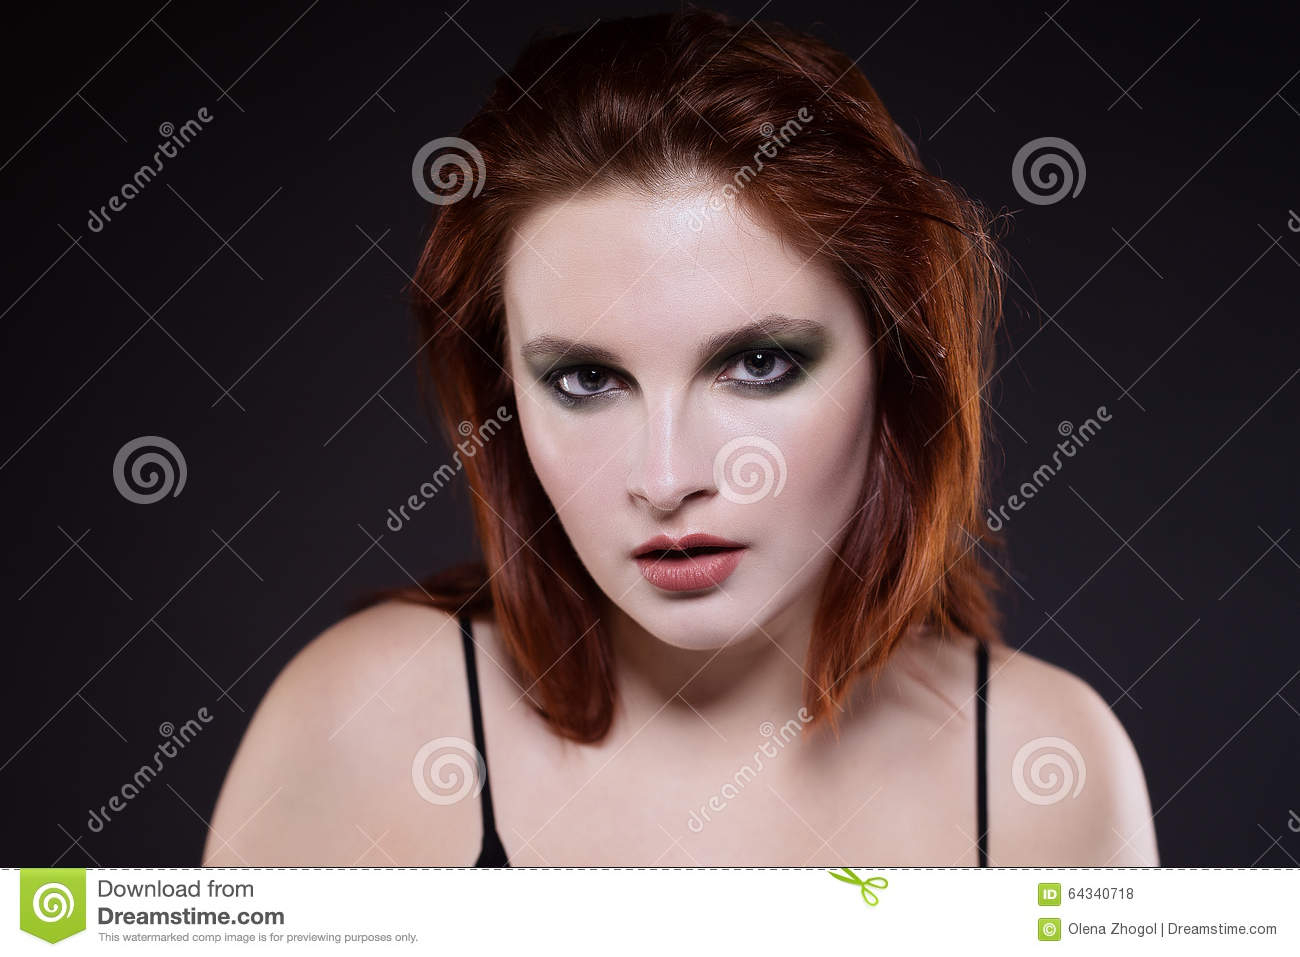 Makeup For Grey Hair And Green Eyes Redhaed Girl With Greensmoky Eyes Makeup Stock Photo Image Of